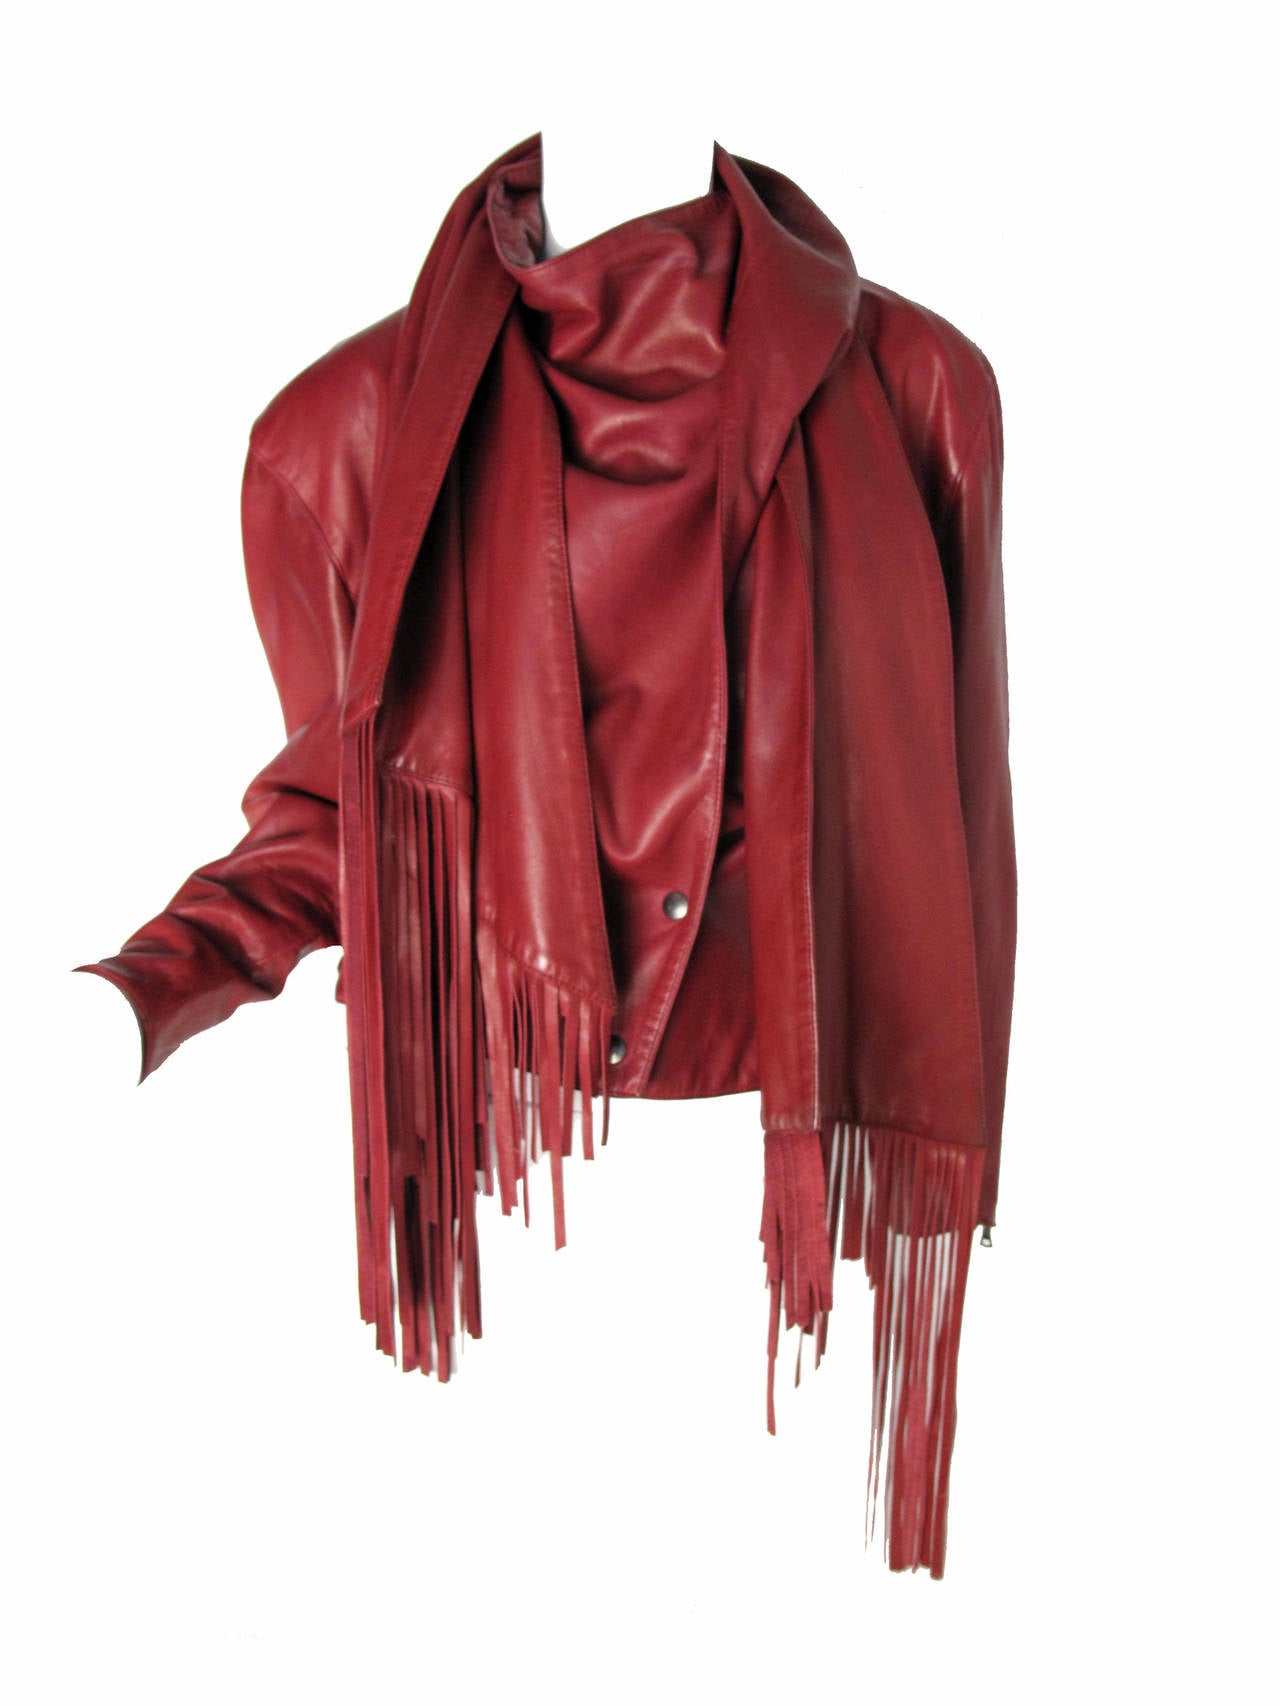 1980s Claude Montana wine colored fringe leather jacket.  Super soft leather. Attached leather scarf wraps around with fringe.  Zippers on cuts. Two snaps to close. 
36